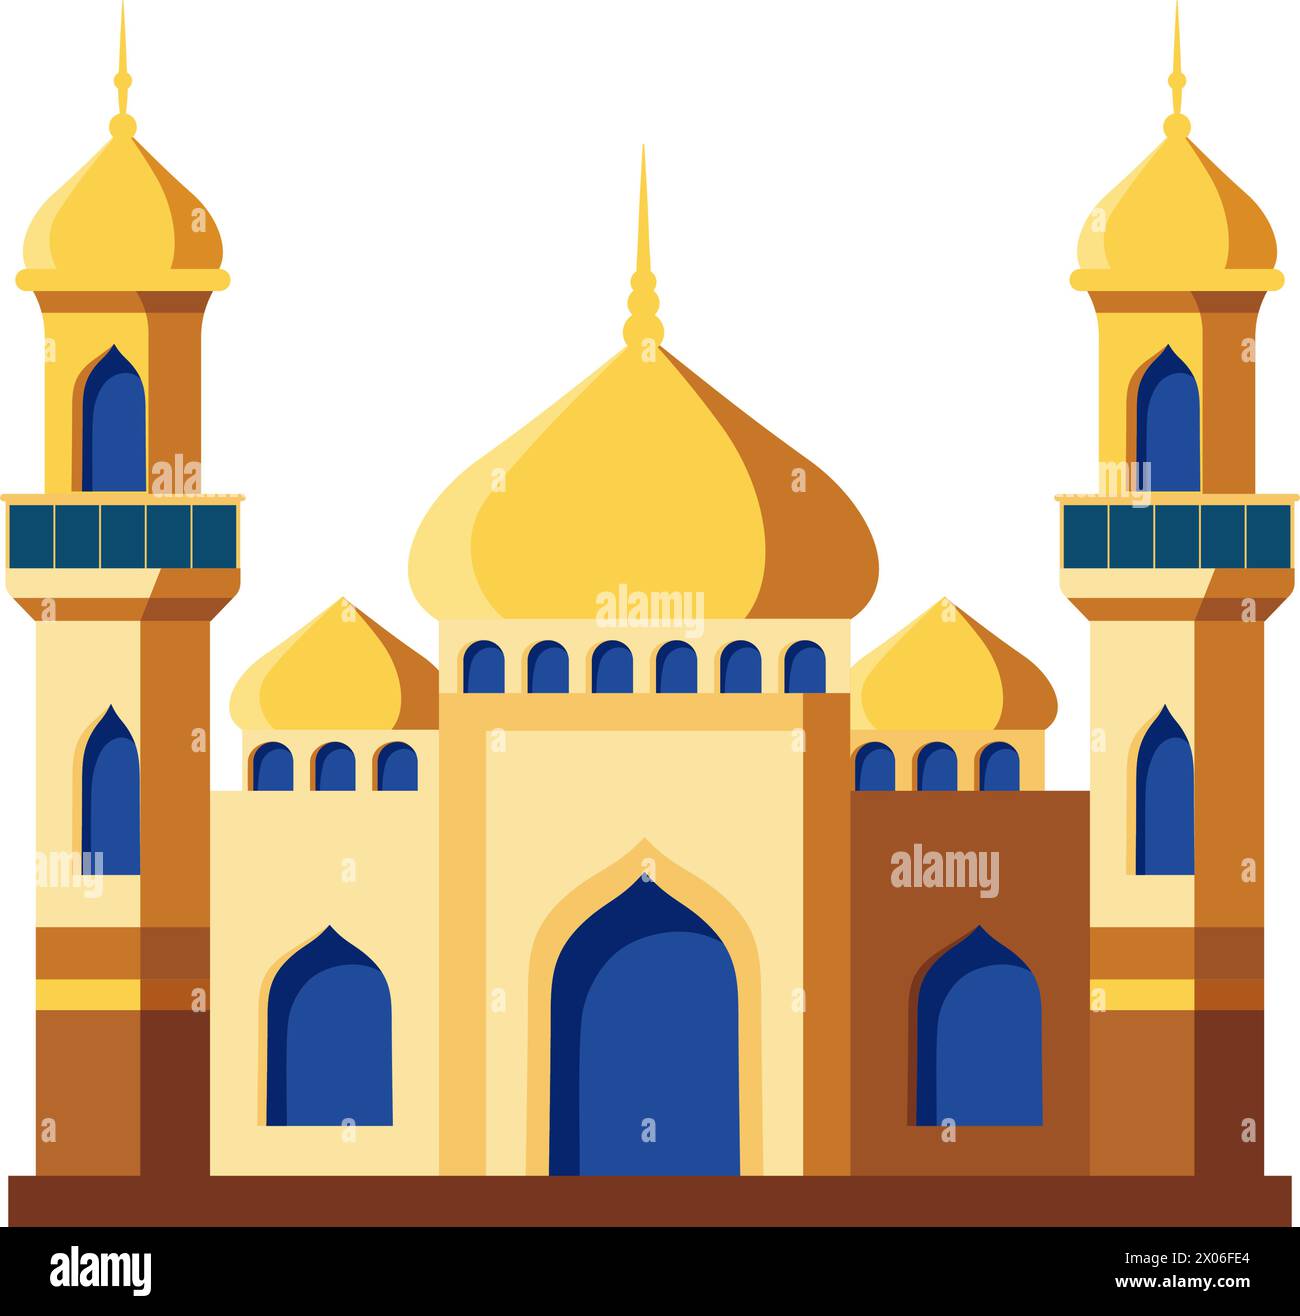 Islamic mosque with a golden dome and minaret. Mosque muslim arabic architecture religious graphics. Prayer building islamic culture. Flat style Stock Vector